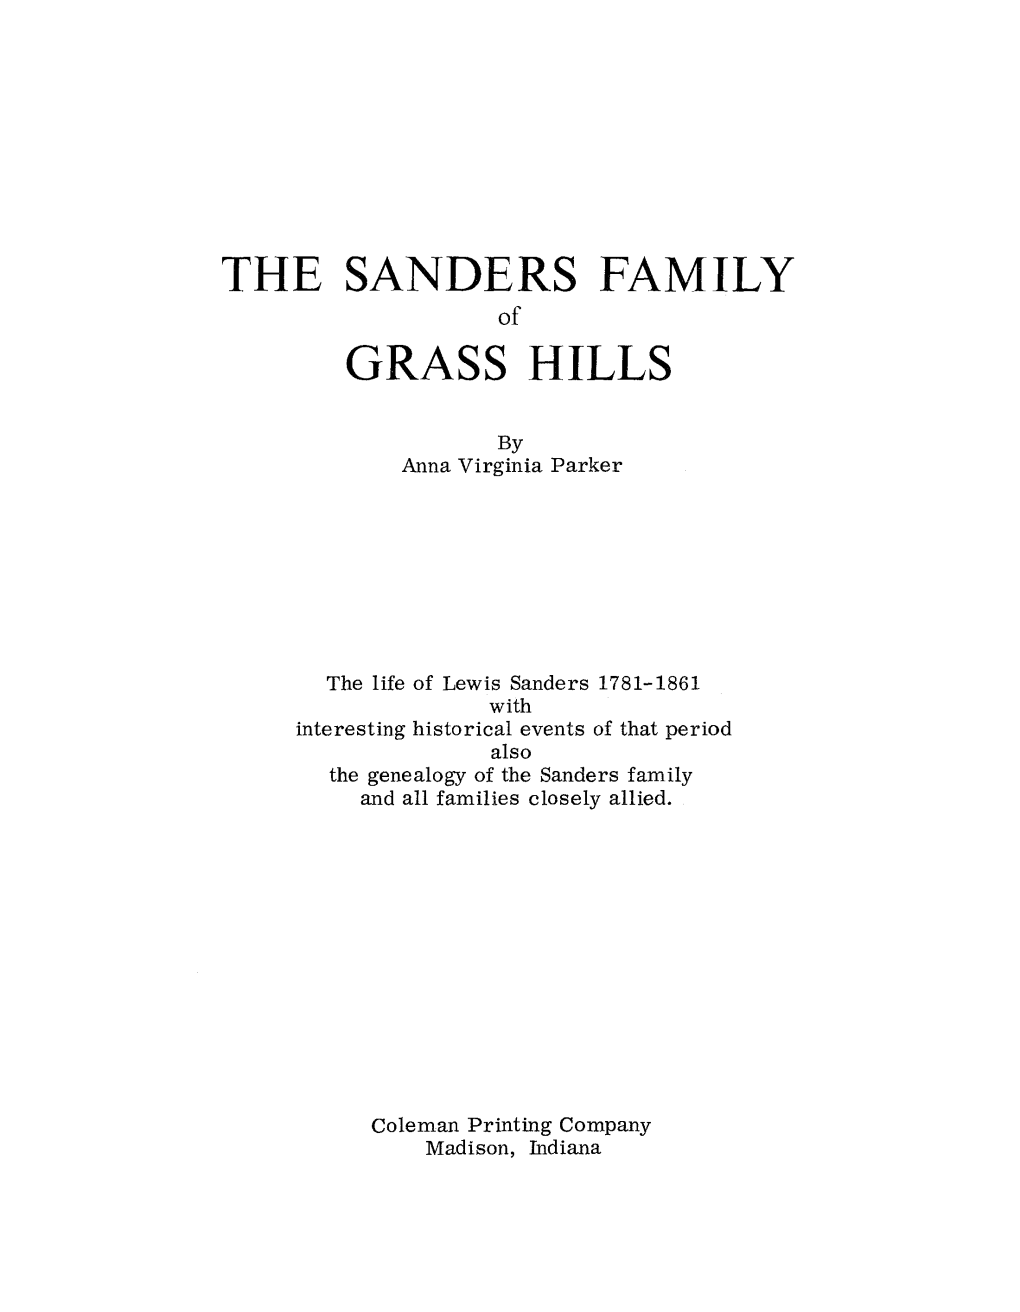 The Sanders Family Grass Hills